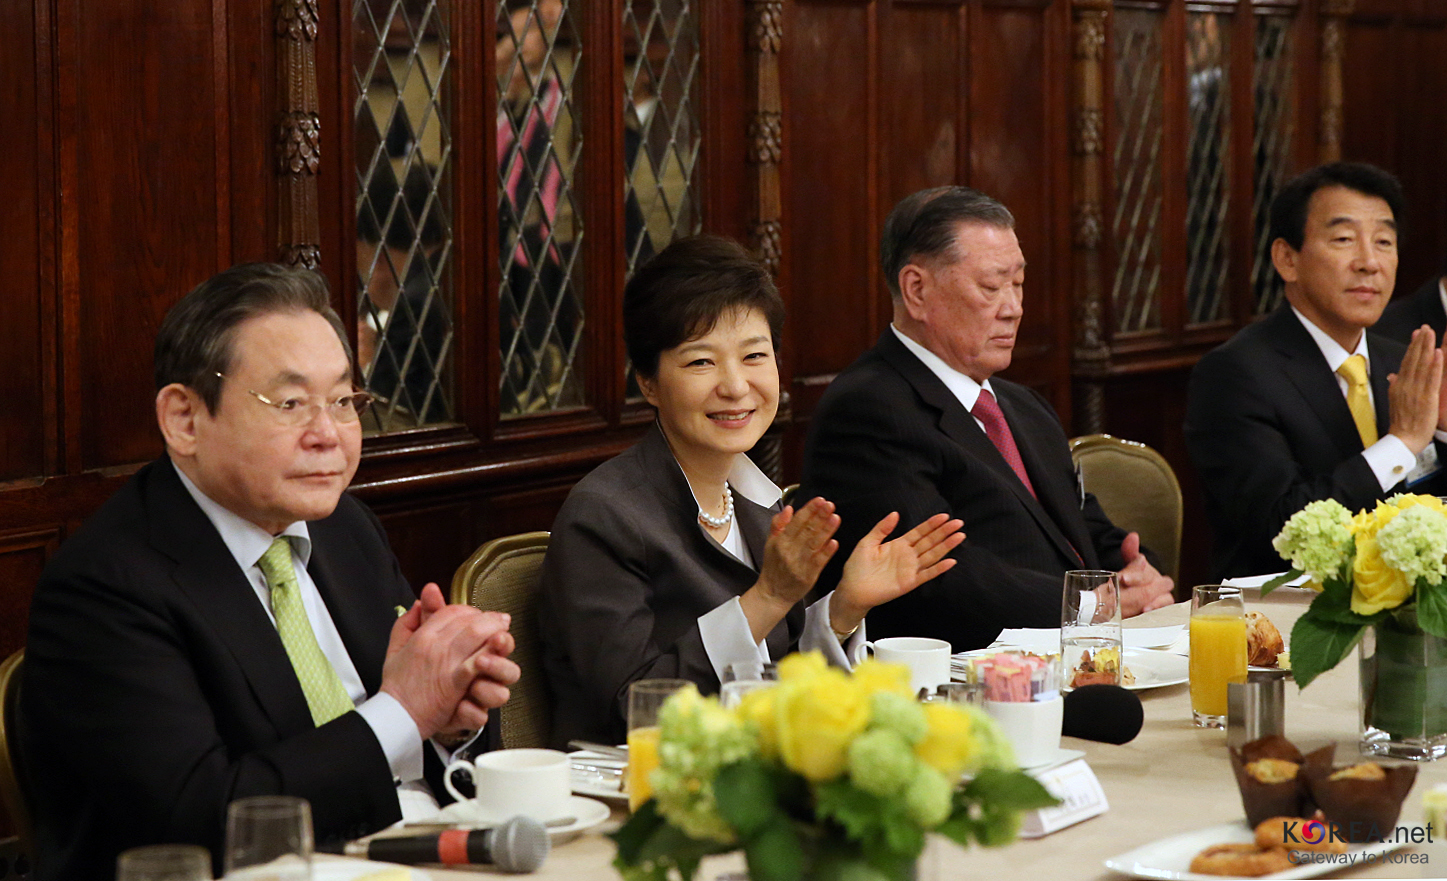 South Korean President Park Geun-hye (center left) at a breakfast meeting with businessmen Lee Kun-hee, former chairman of the Samsung Group (left) and Chung Mong-koo, former CEO of the Hyundai Motor Group (center right), 2013.